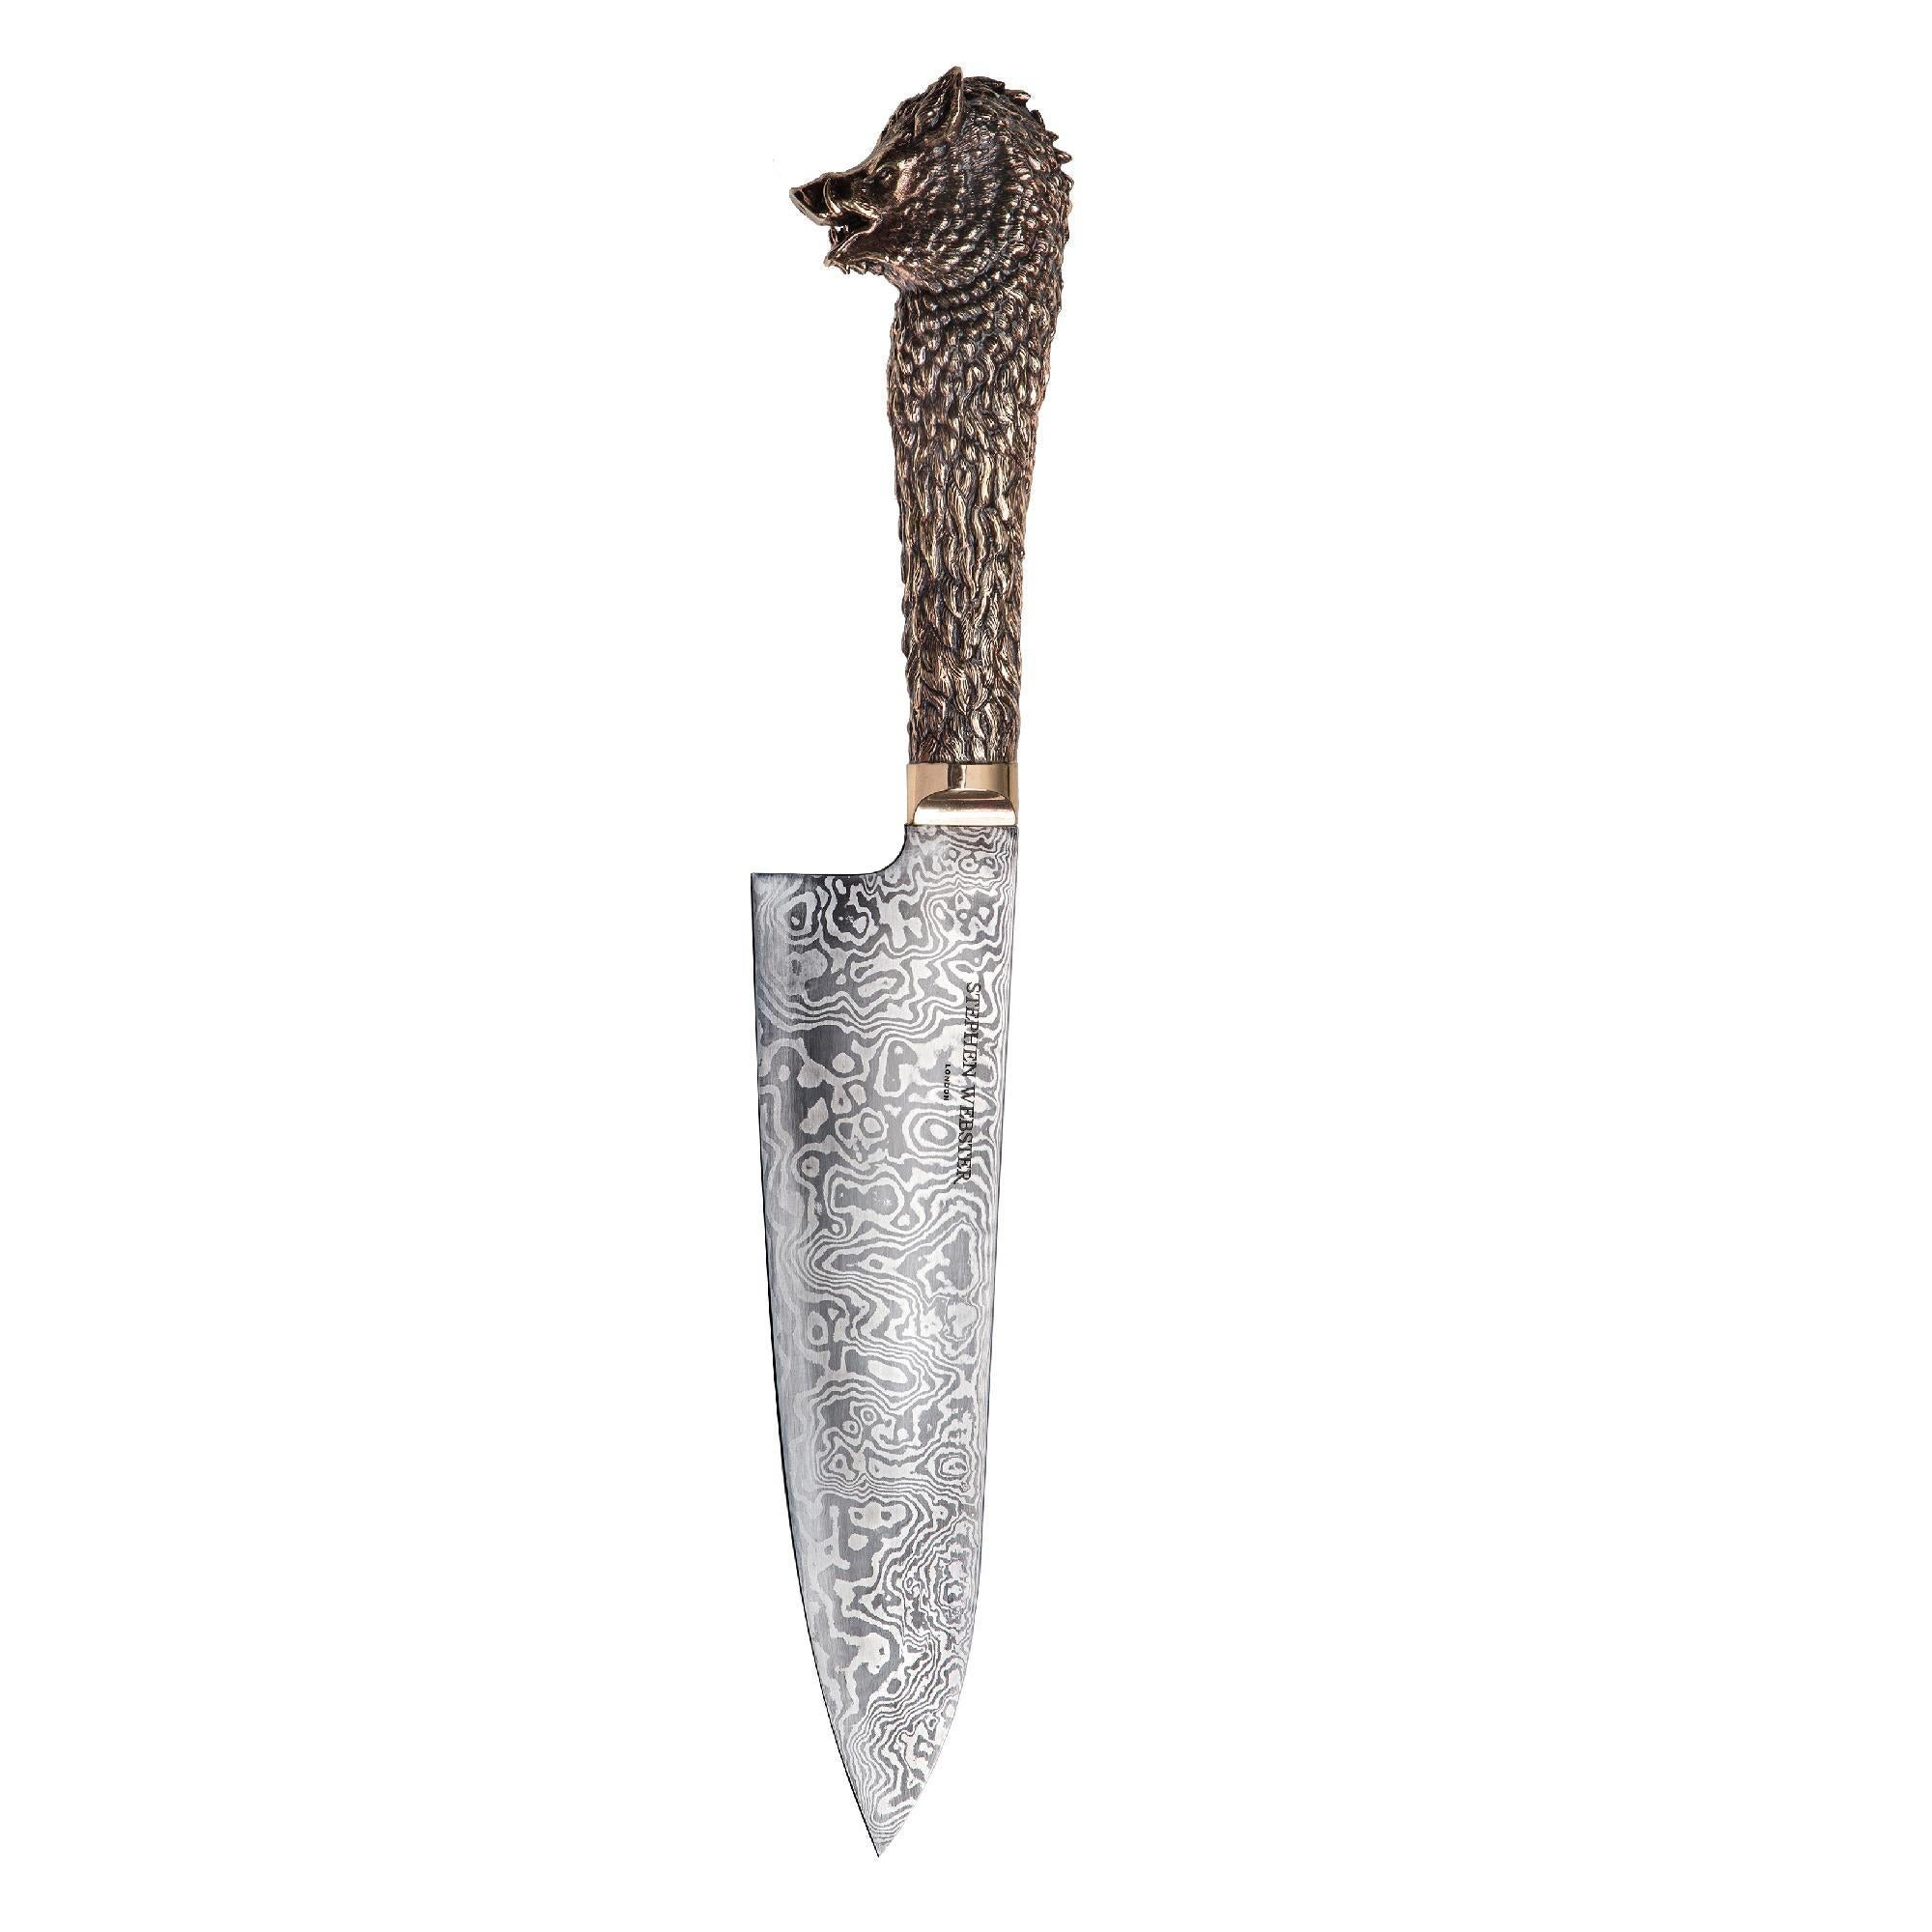 Stephen Webster Beasts Chef's Knives with Steel Blades and Bronze Handles 1